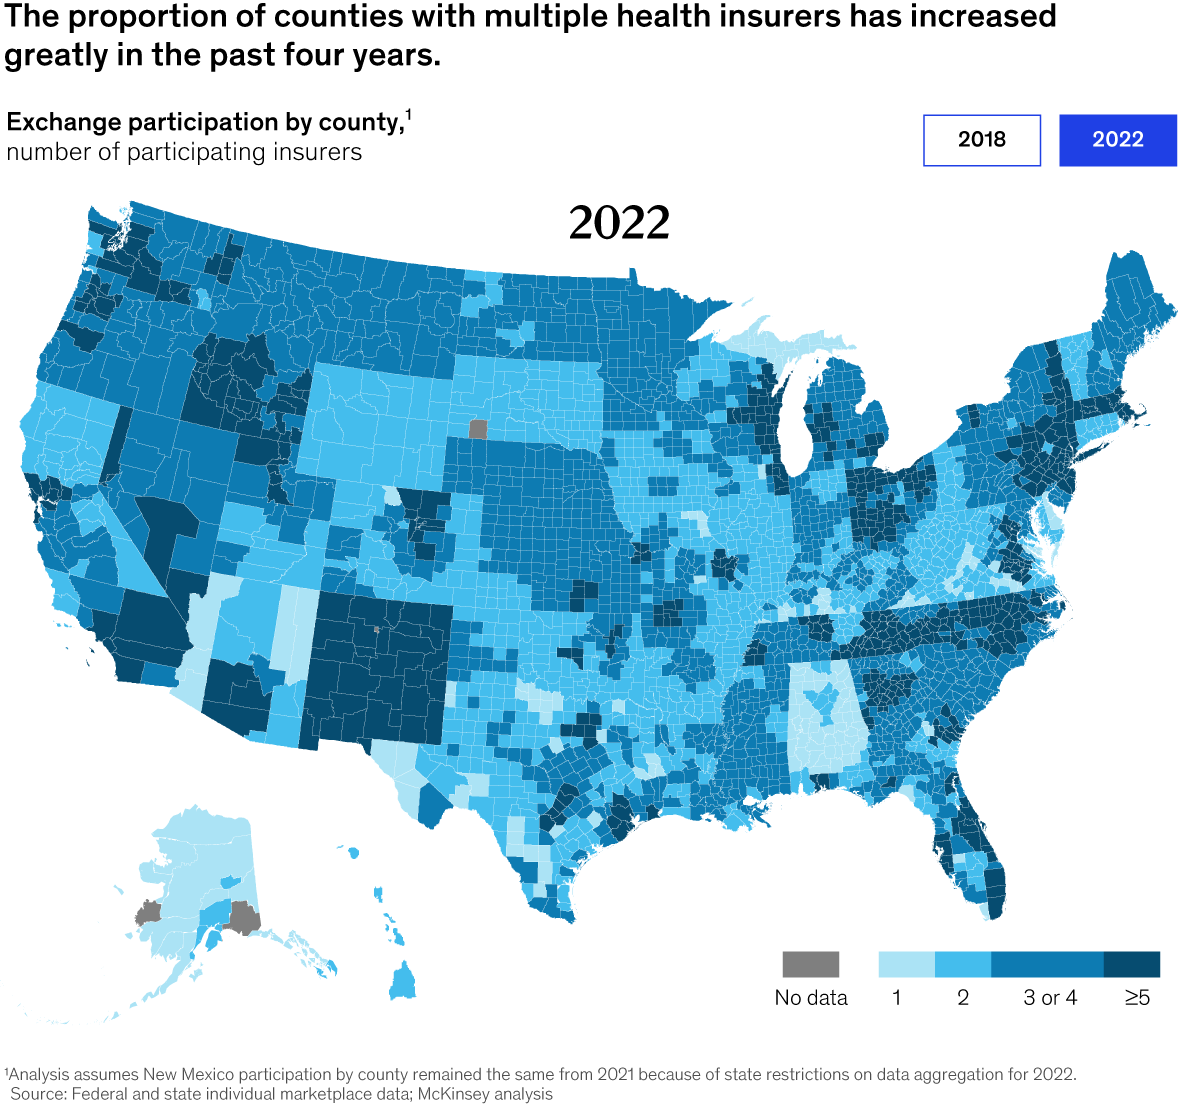 Map of the United States showing the proportion of counties with multiple health insurers